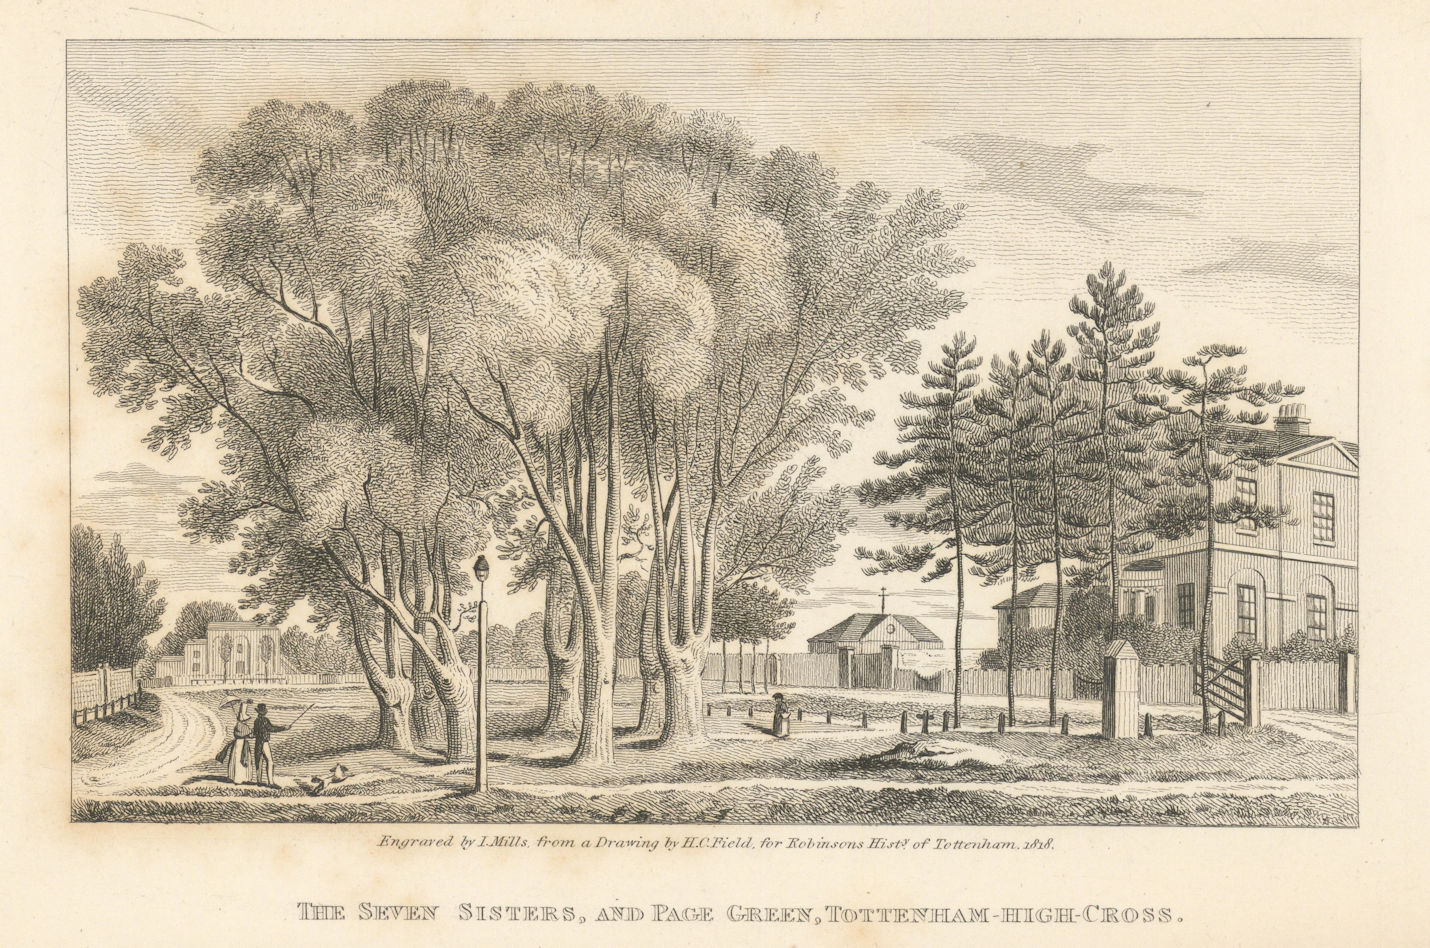 Associate Product The Seven Sisters elm trees & Page Green Common, Tottenham High Cross 1840